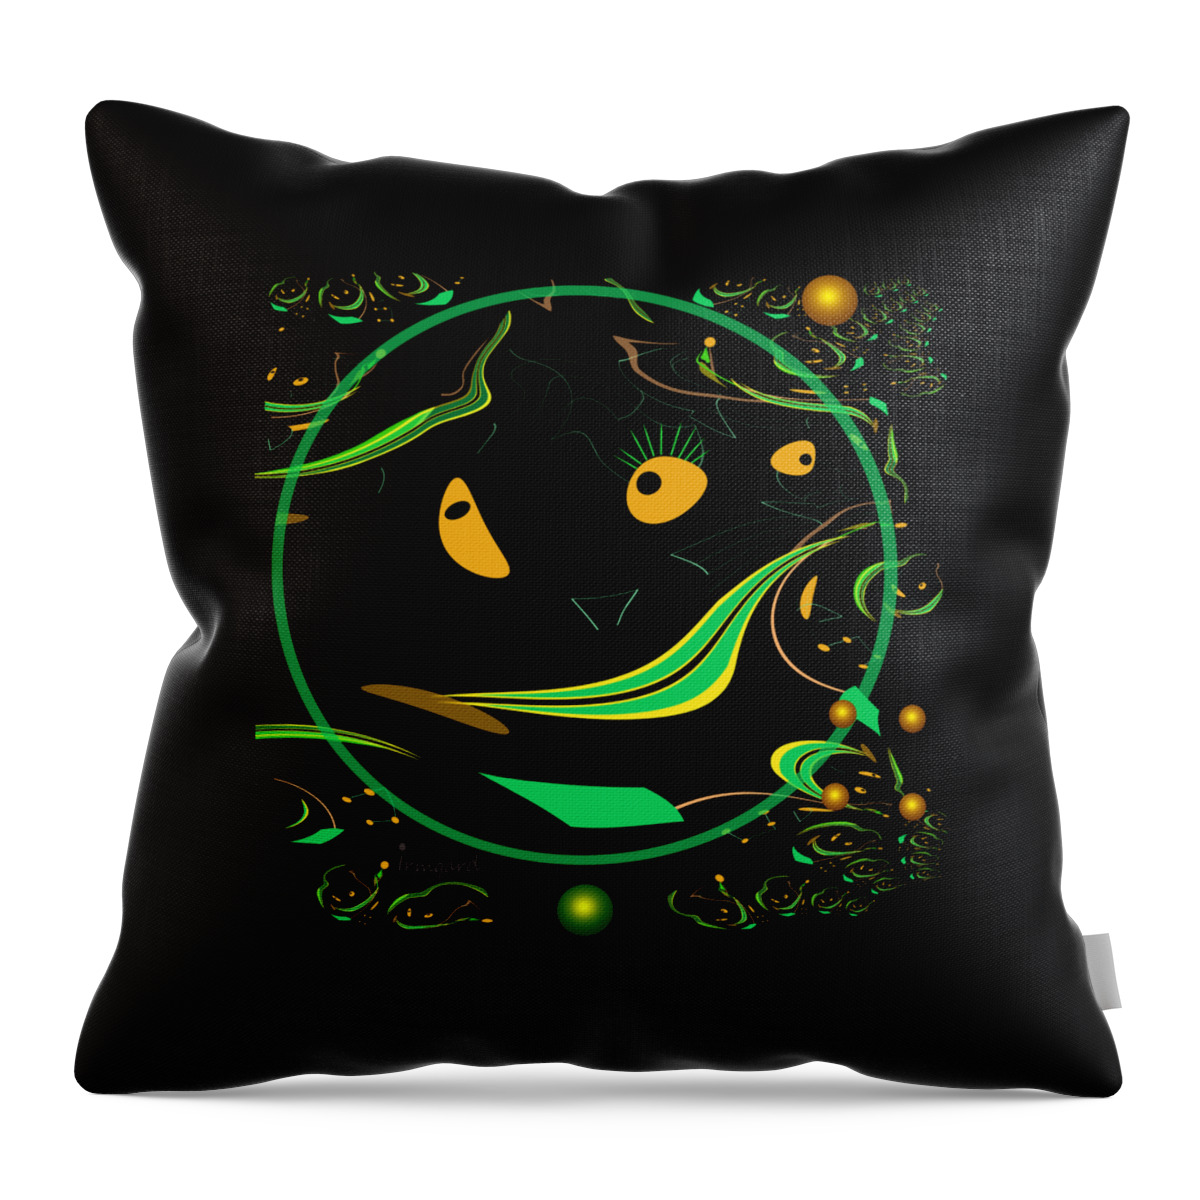 1280 Throw Pillow featuring the painting 1280 - T Shirt Pattern by Irmgard Schoendorf Welch